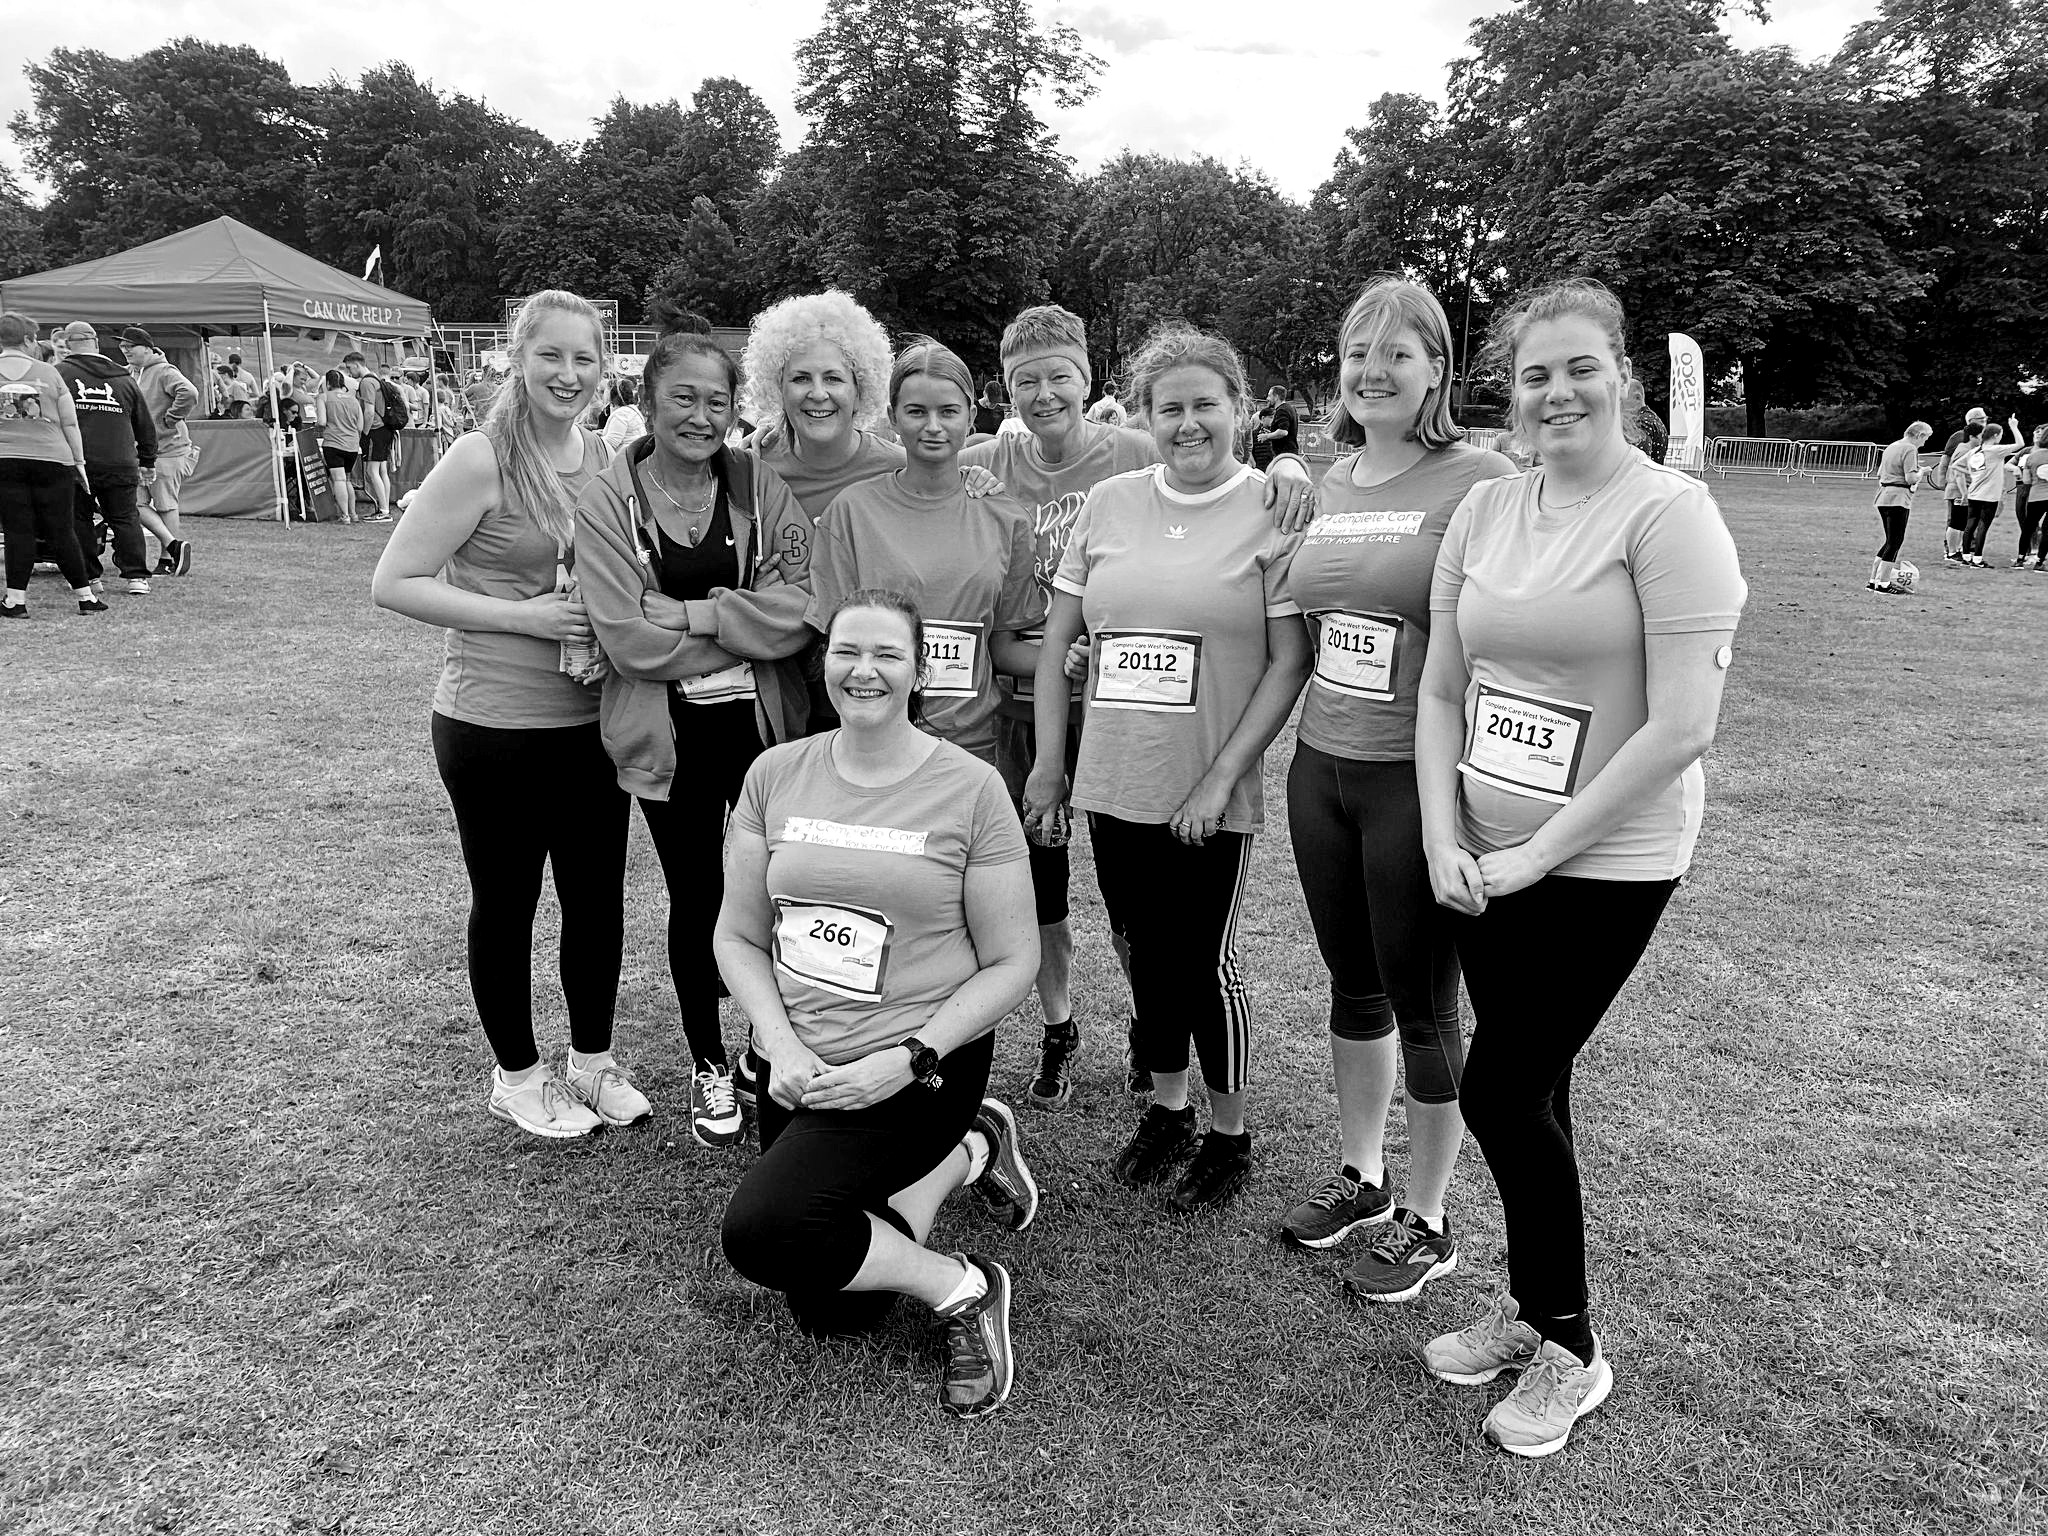 Complete Care West Yorkshire at Race for Life